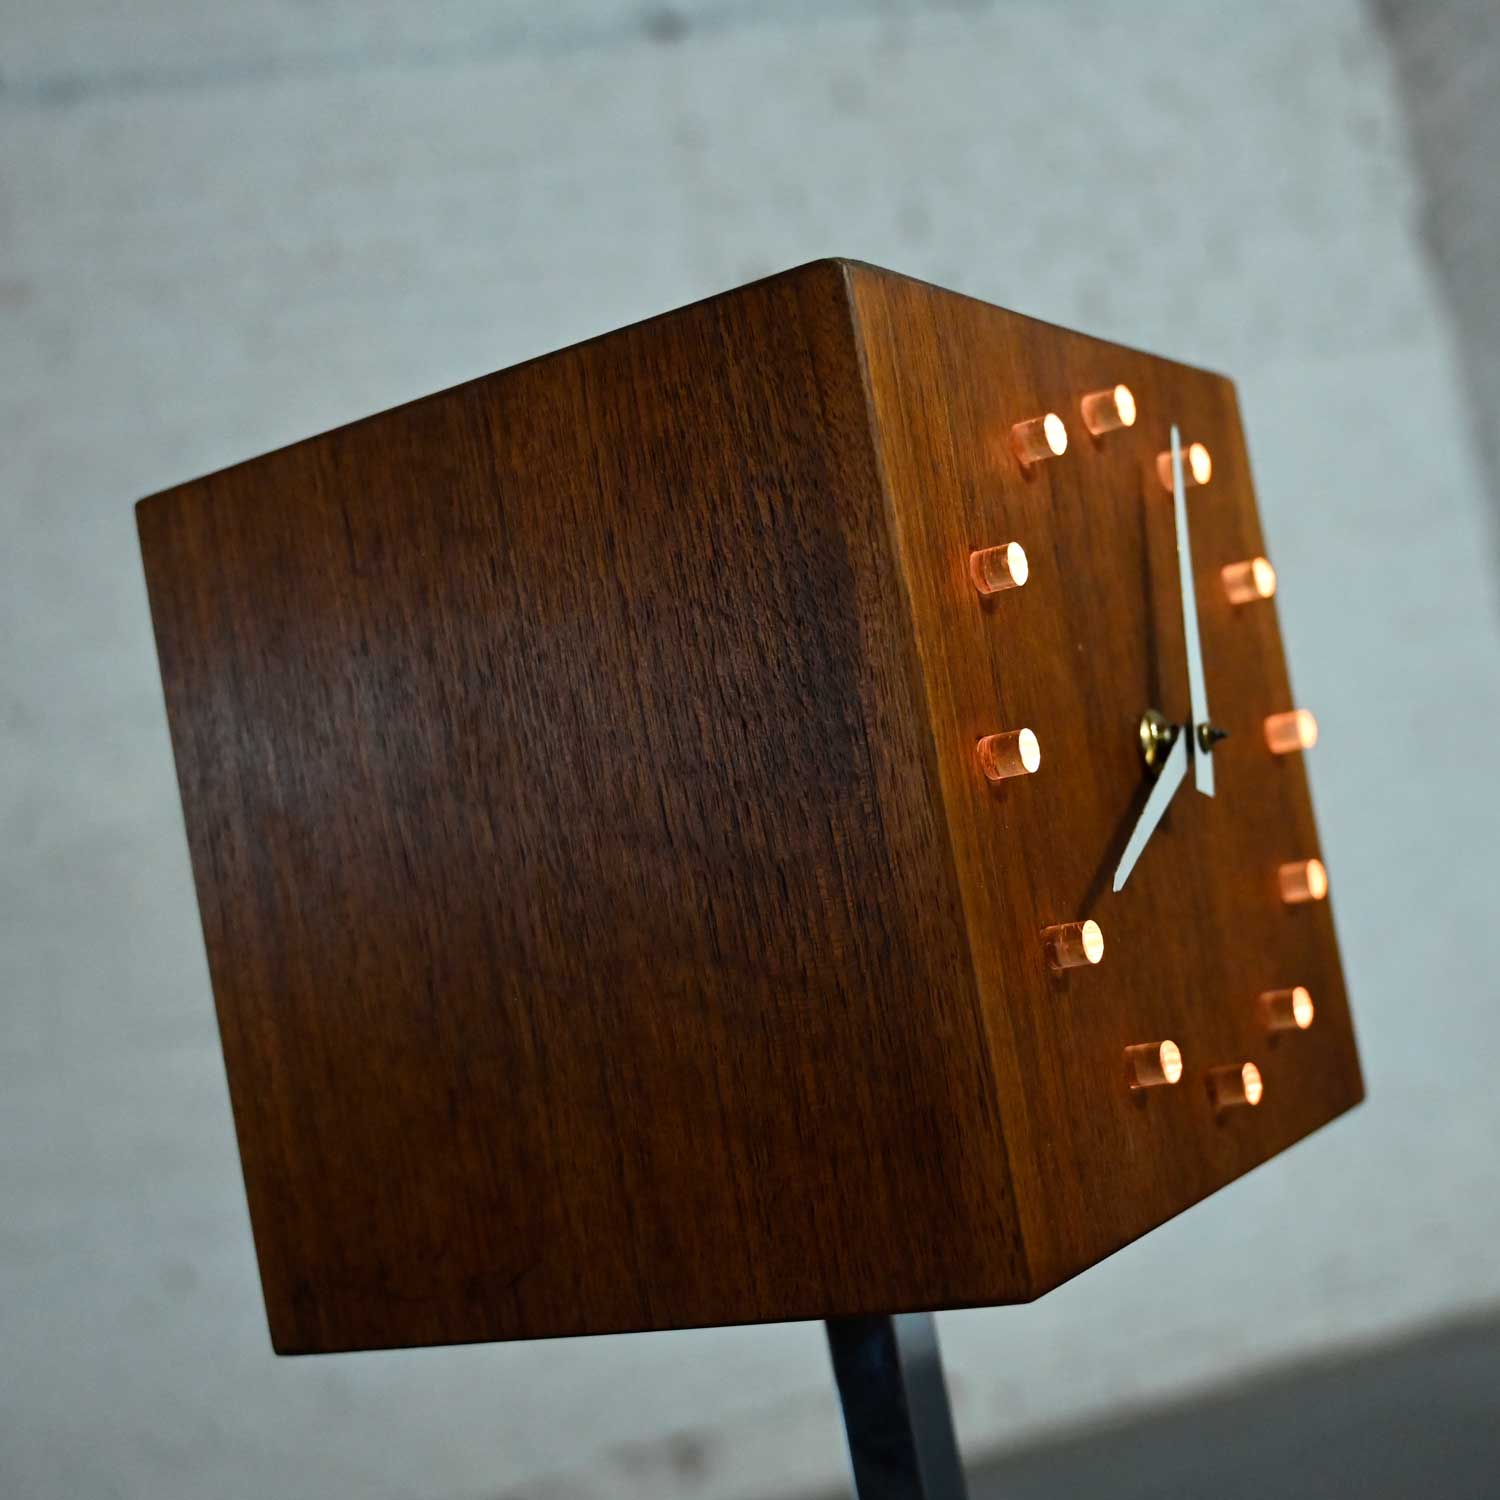 Mid-Century Modern Walnut & Chrome Cube Clock Lamp on Stand by V. H. Woolums Style of Howard Miller Clocks